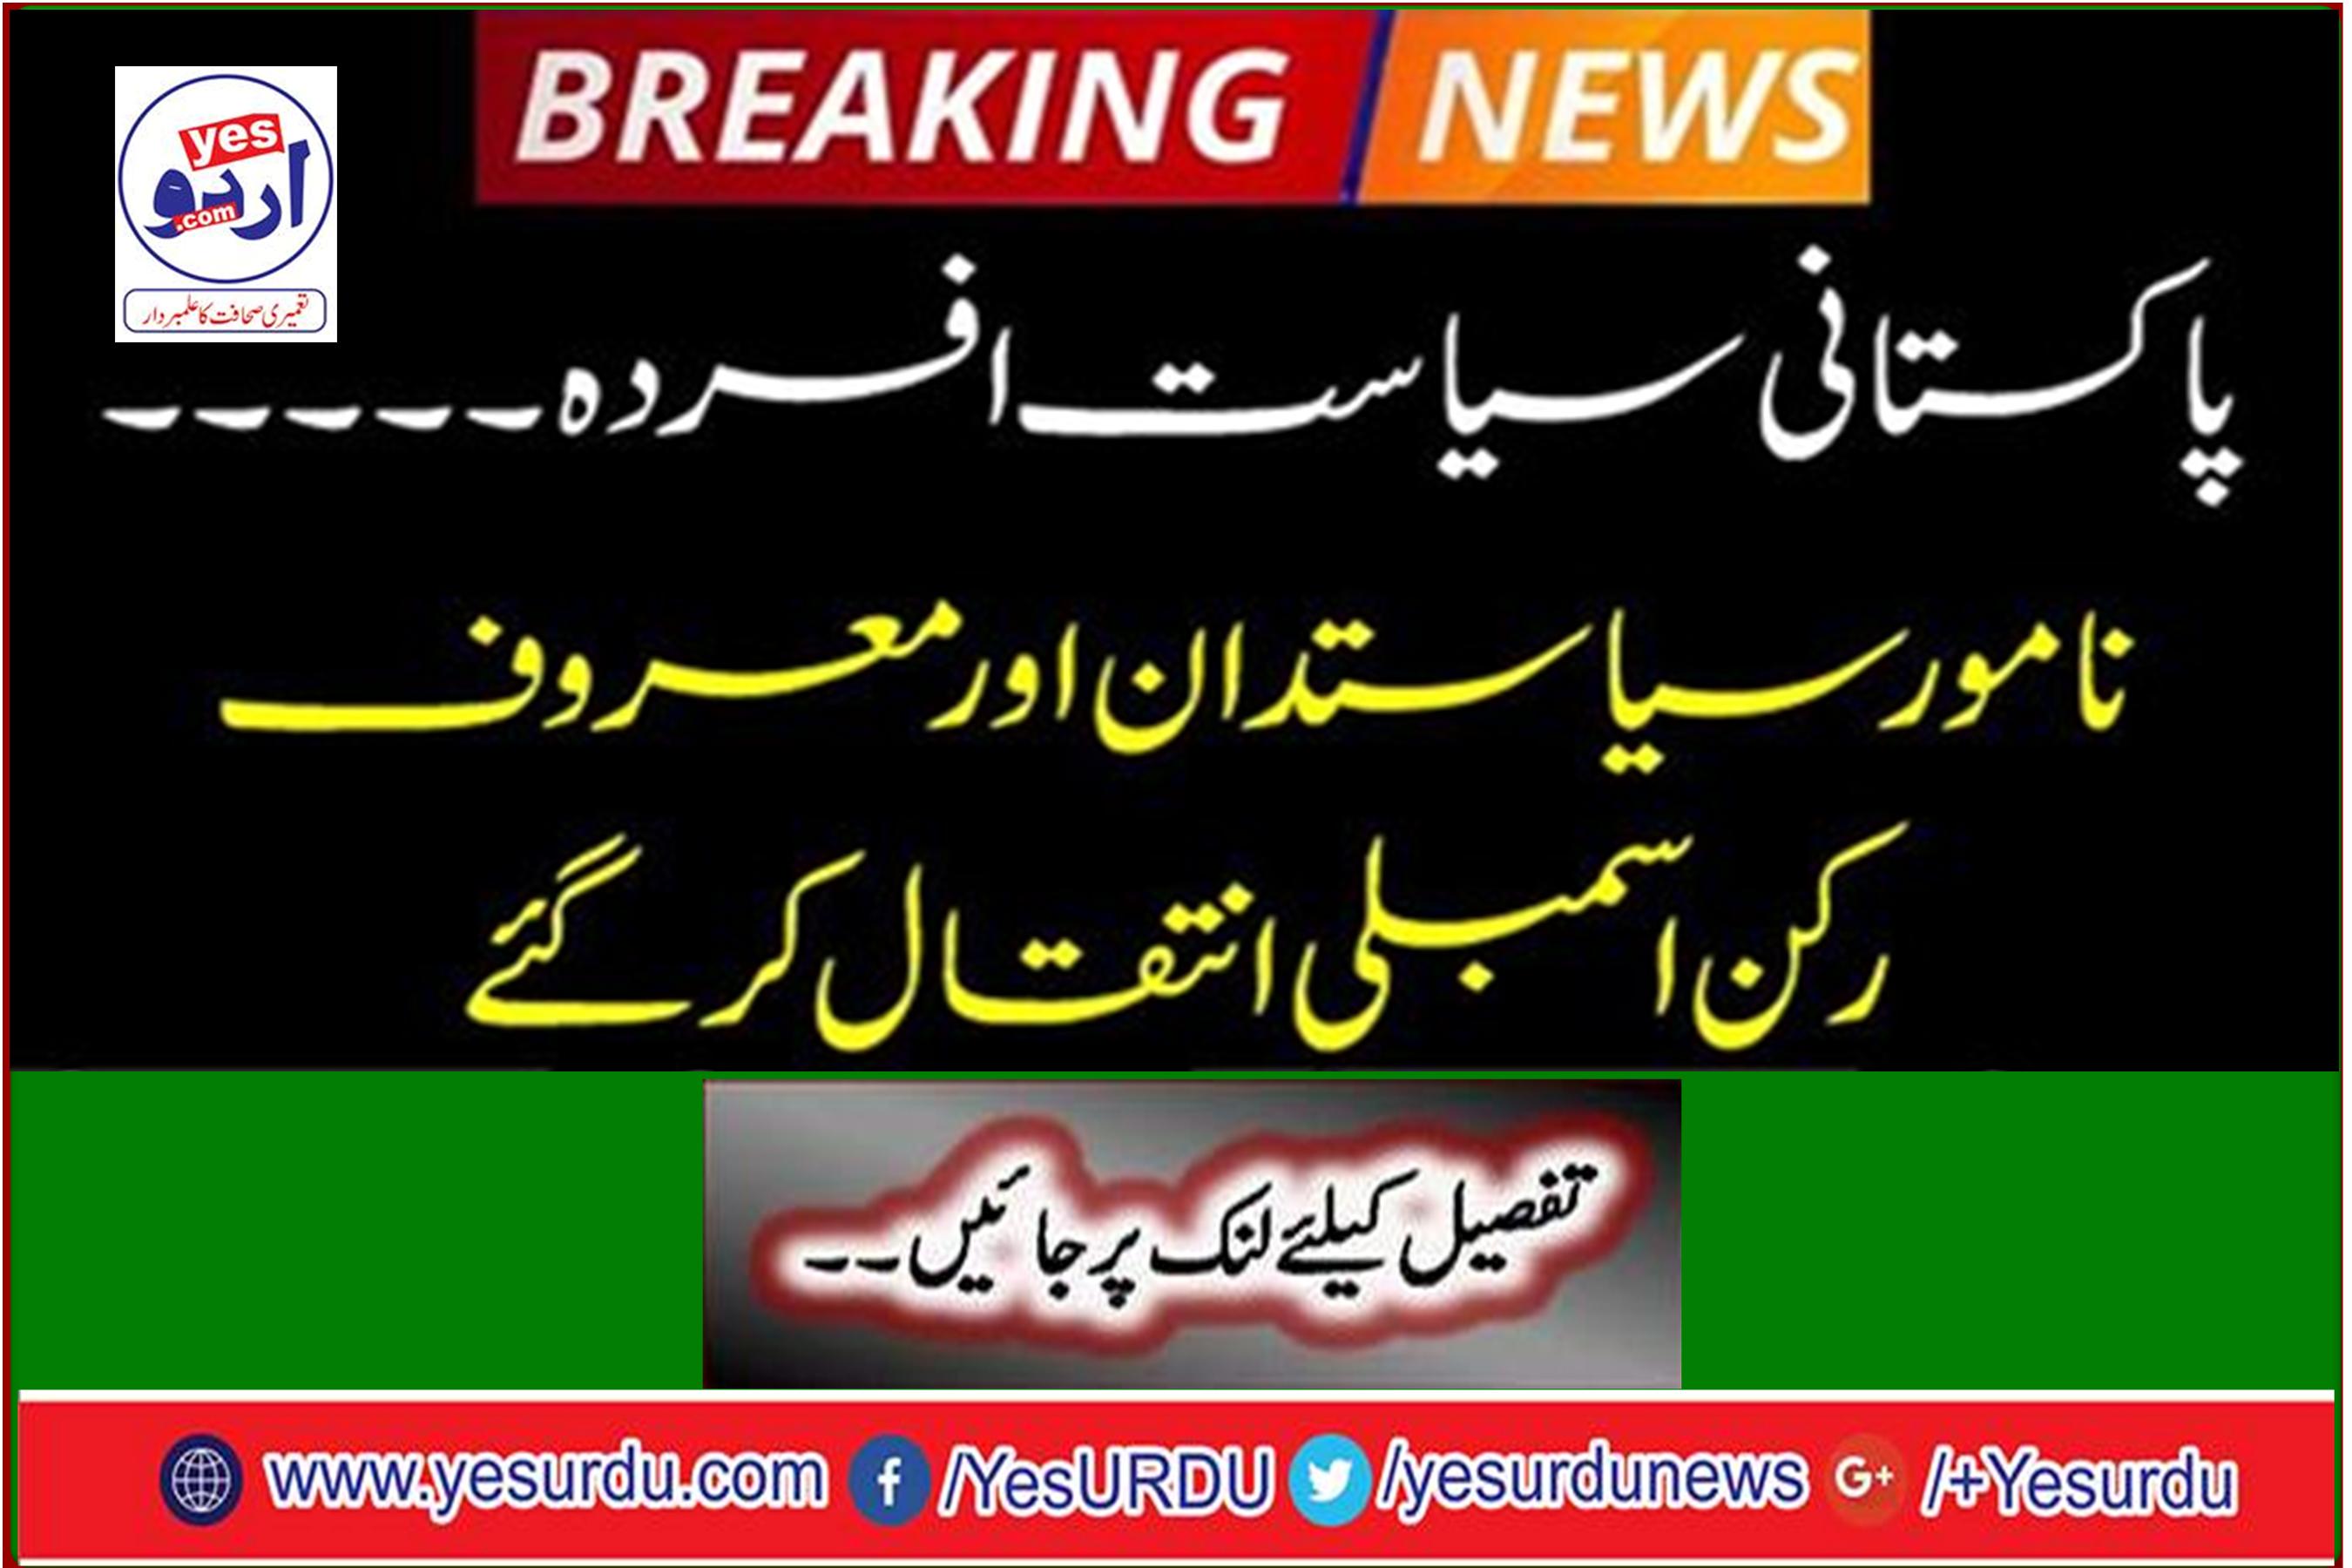 Breaking News: Pakistani politics sad ... Eminent politicians and well-known MPs passed away